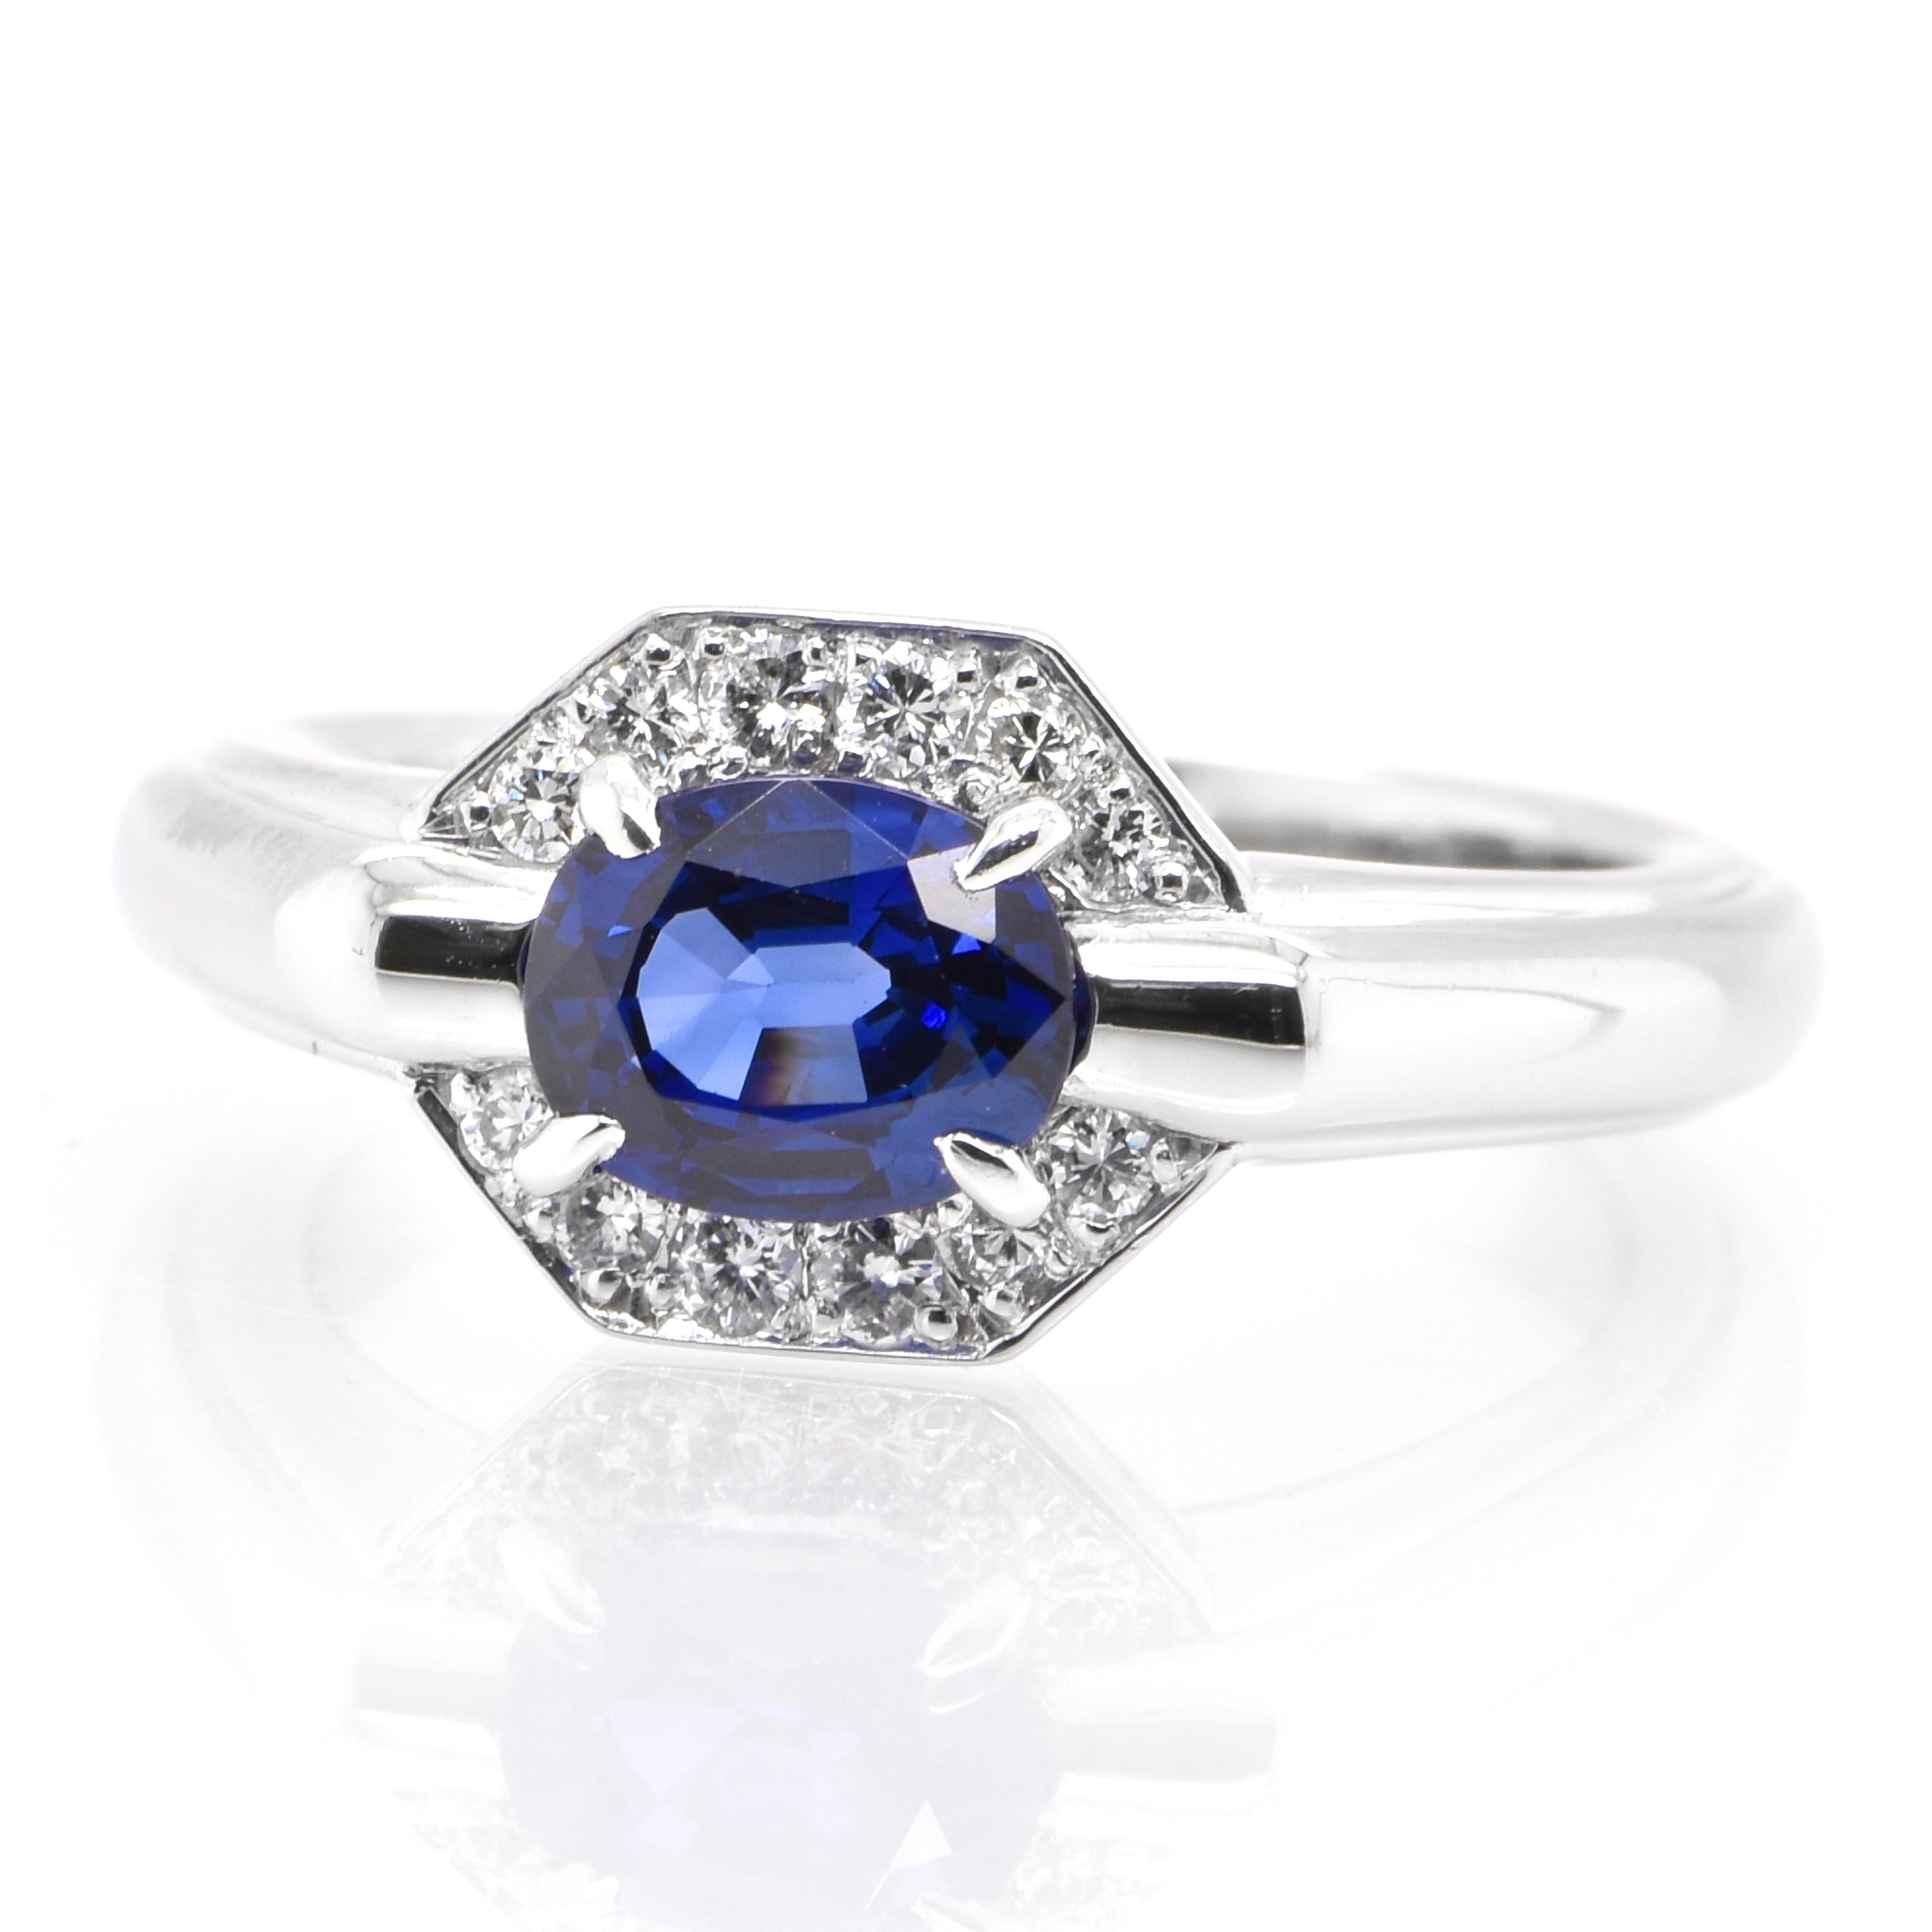 A beautiful ring featuring 1.20 Carat Natural Sapphire and 0.17 Carats Diamond Accents set in Platinum. Sapphires have extraordinary durability - they excel in hardness as well as toughness and durability making them very popular in jewelry.